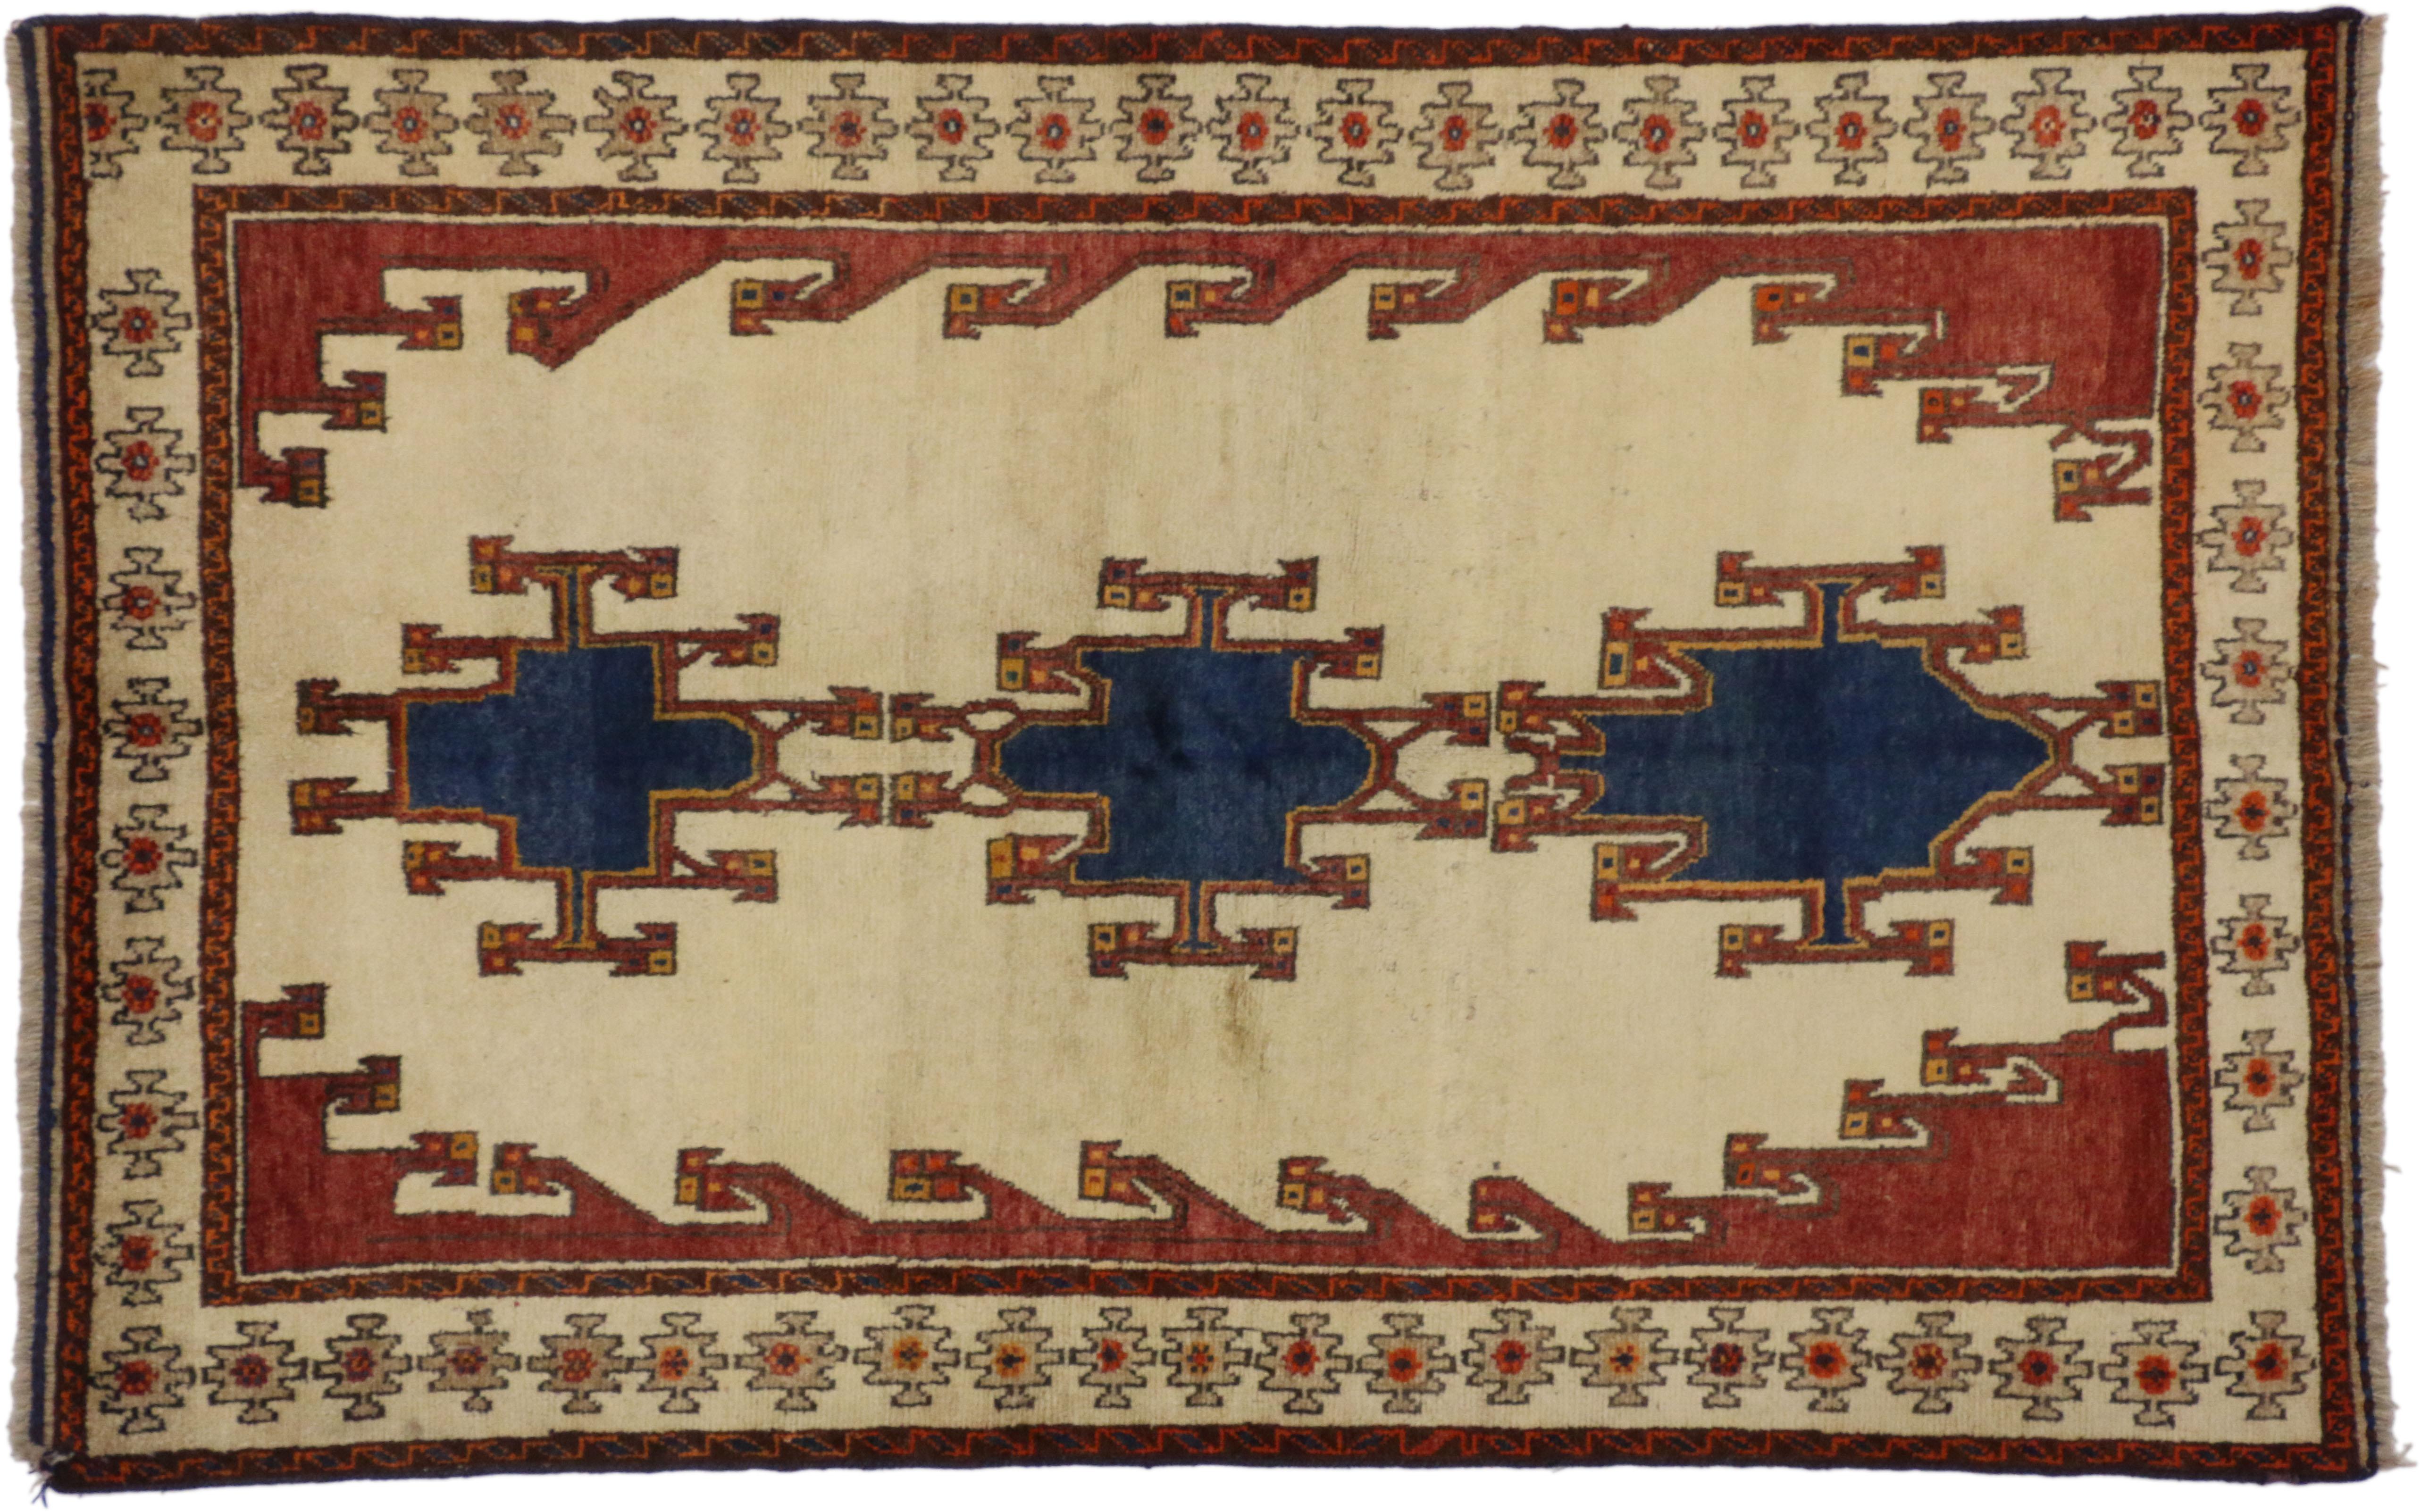 75066 Vintage Persian Shiraz Accent Rug with Tribal Style 04'08 x 07'04. This hand-knotted wool vintage Shiraz Persian rug with modern tribal style features three blue geometric medallions outlined with a border known as birds in a tree. The triple